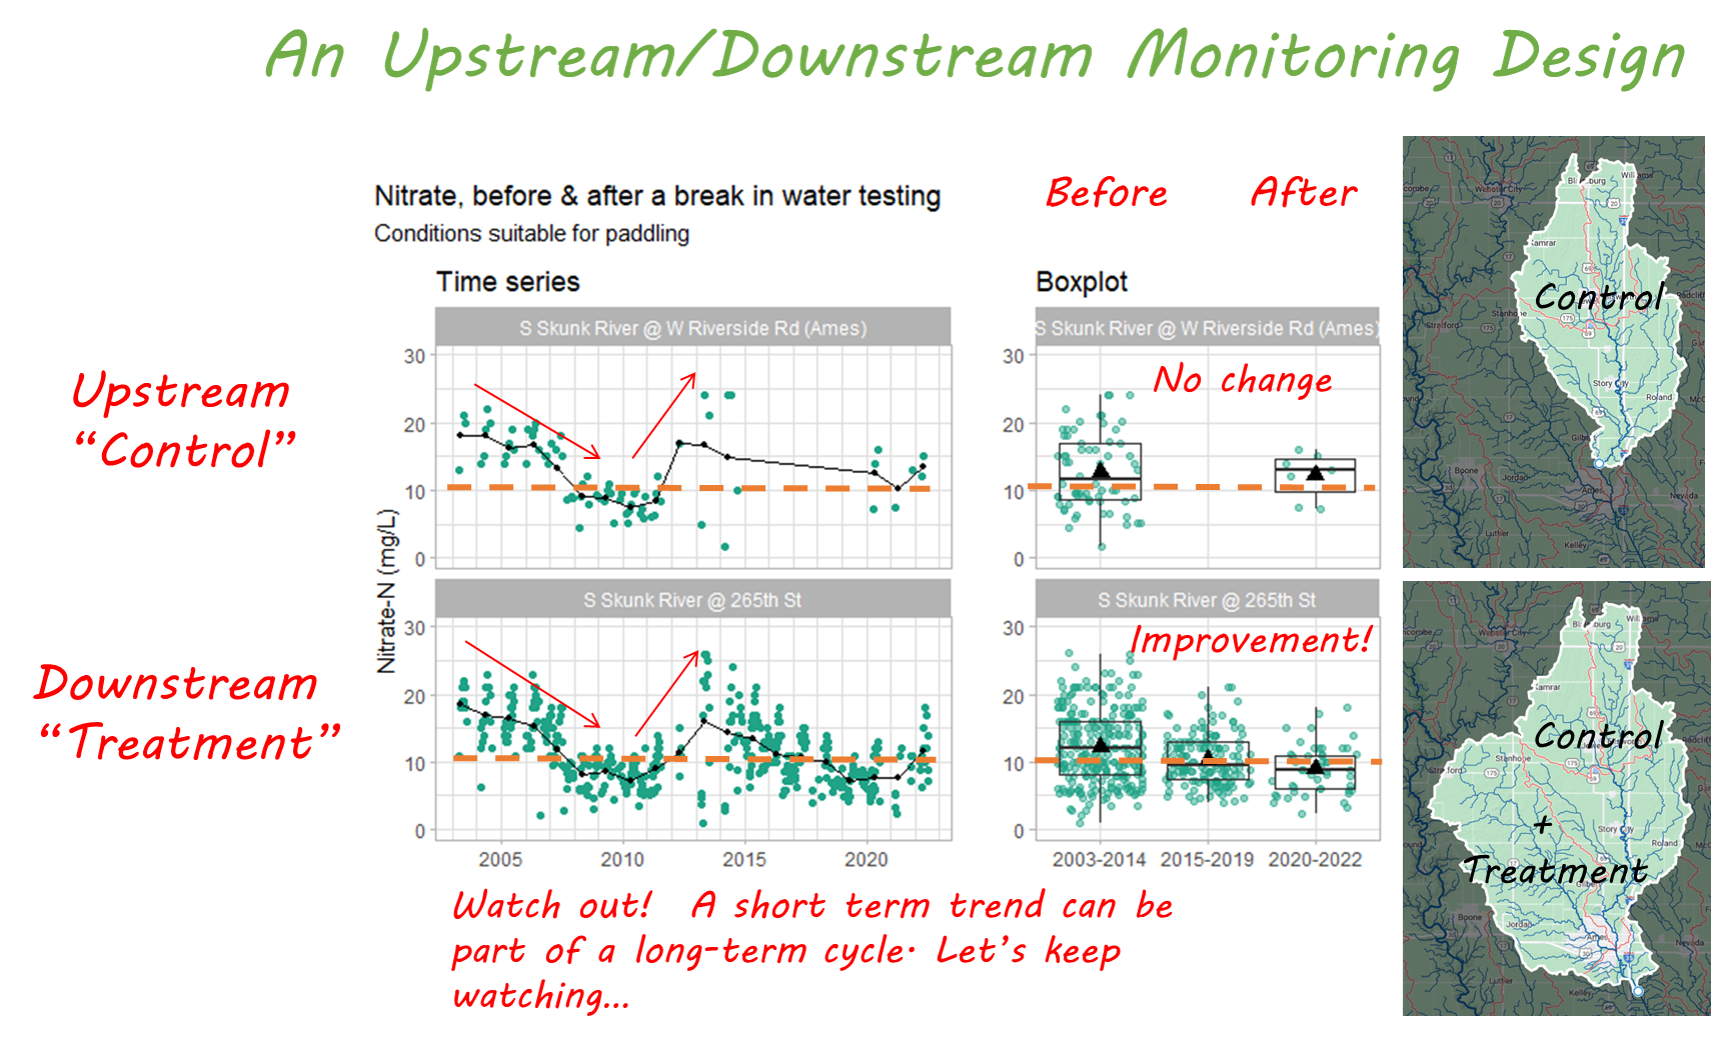 graphs comparing nitrate at upstream and downstream sites